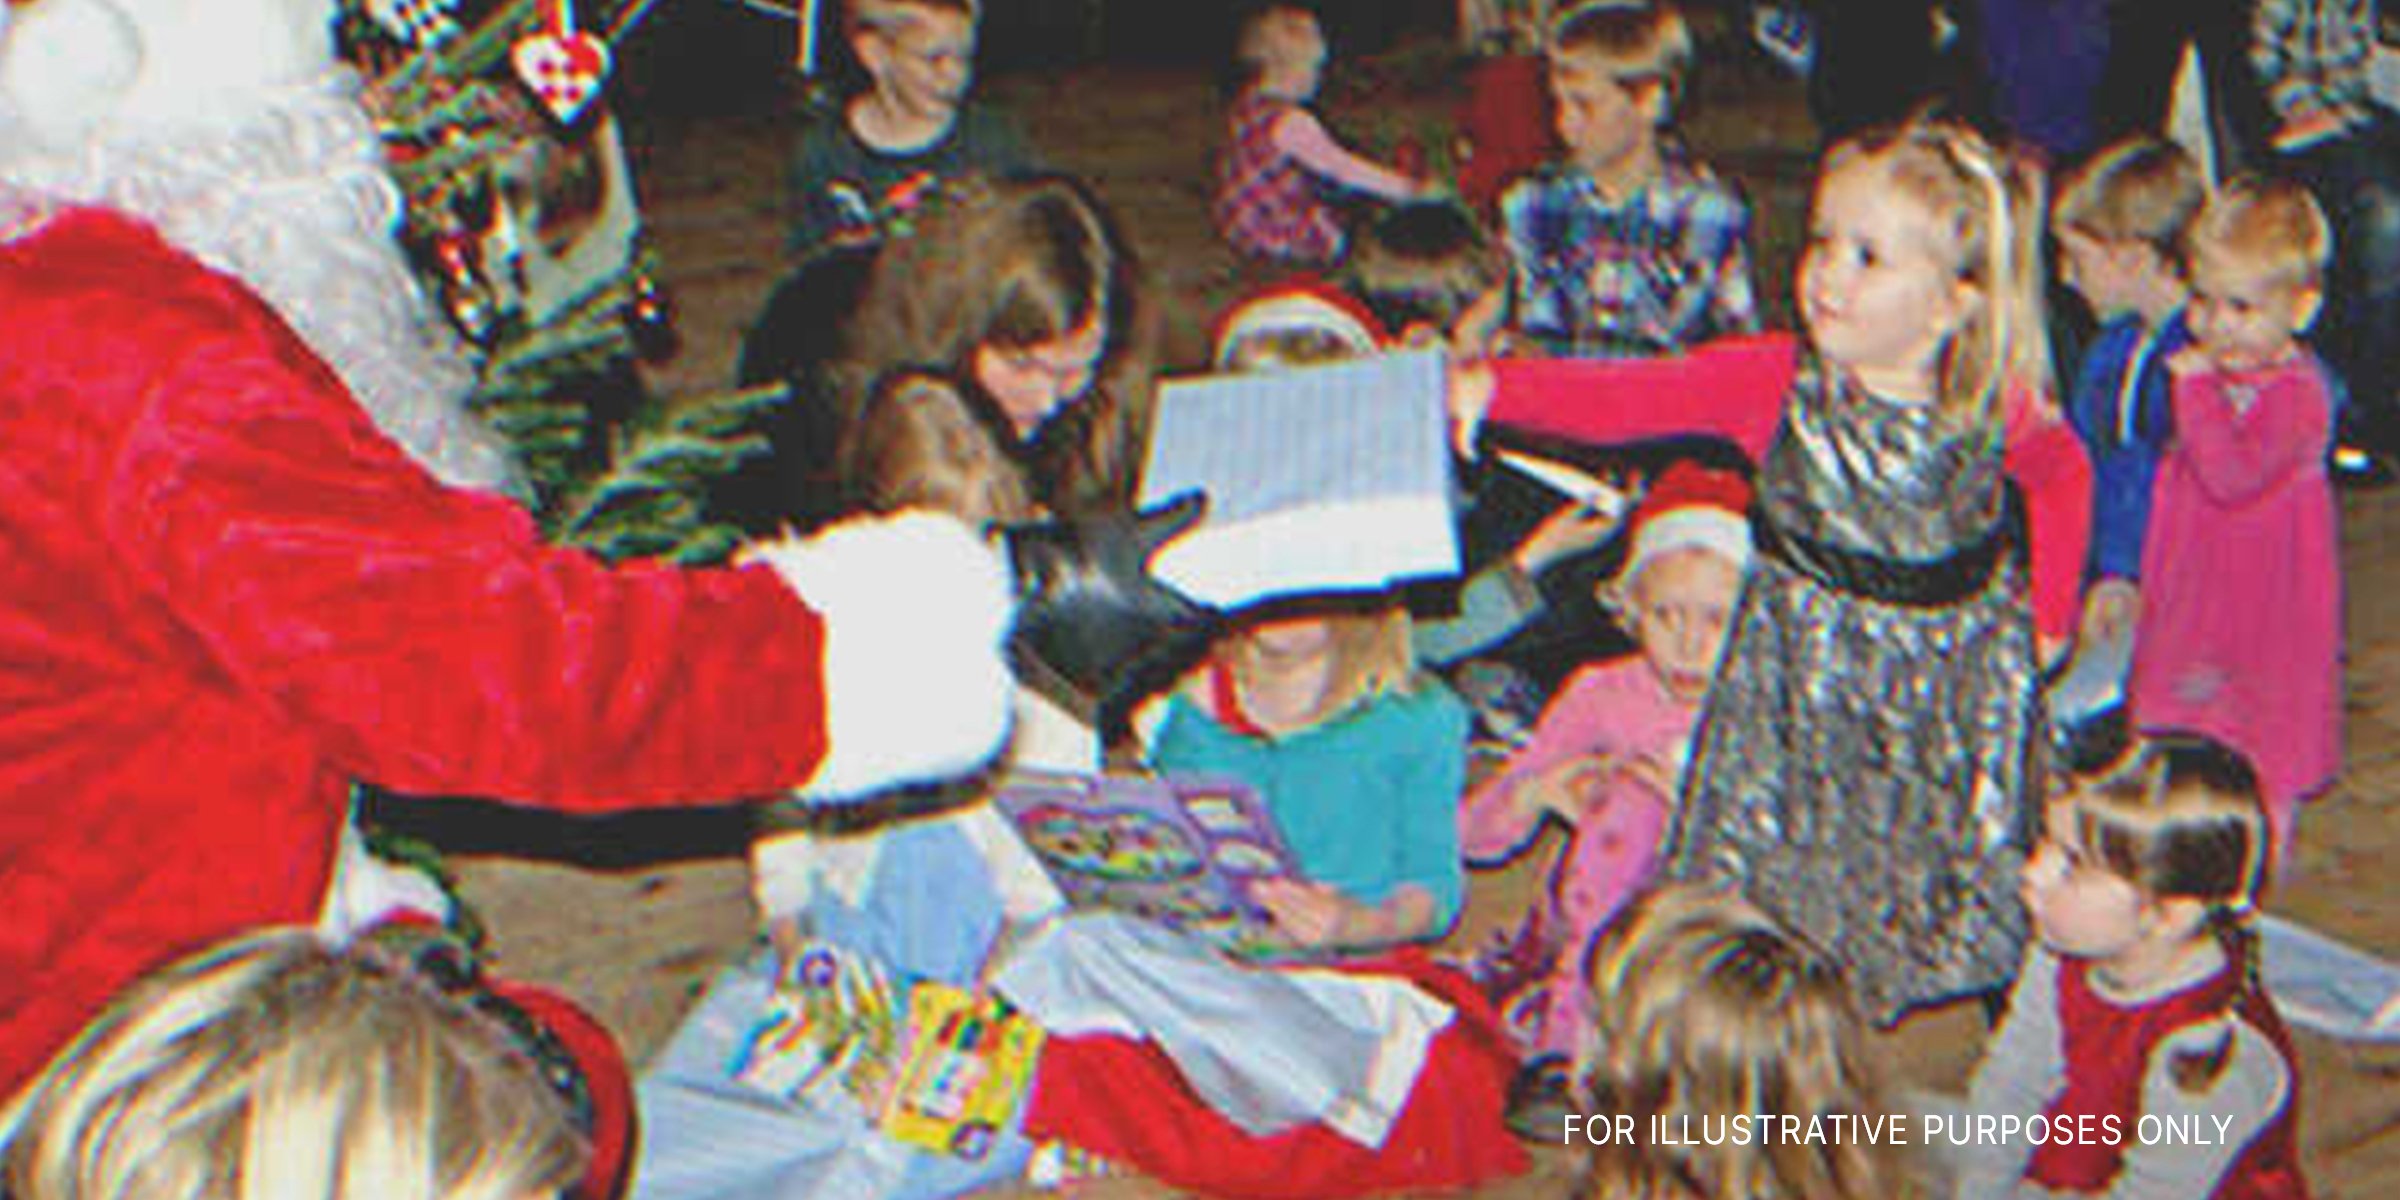 Santa Giving Gifts To Children. | Source: Flickr / viralbus (CC BY-SA 2.0)